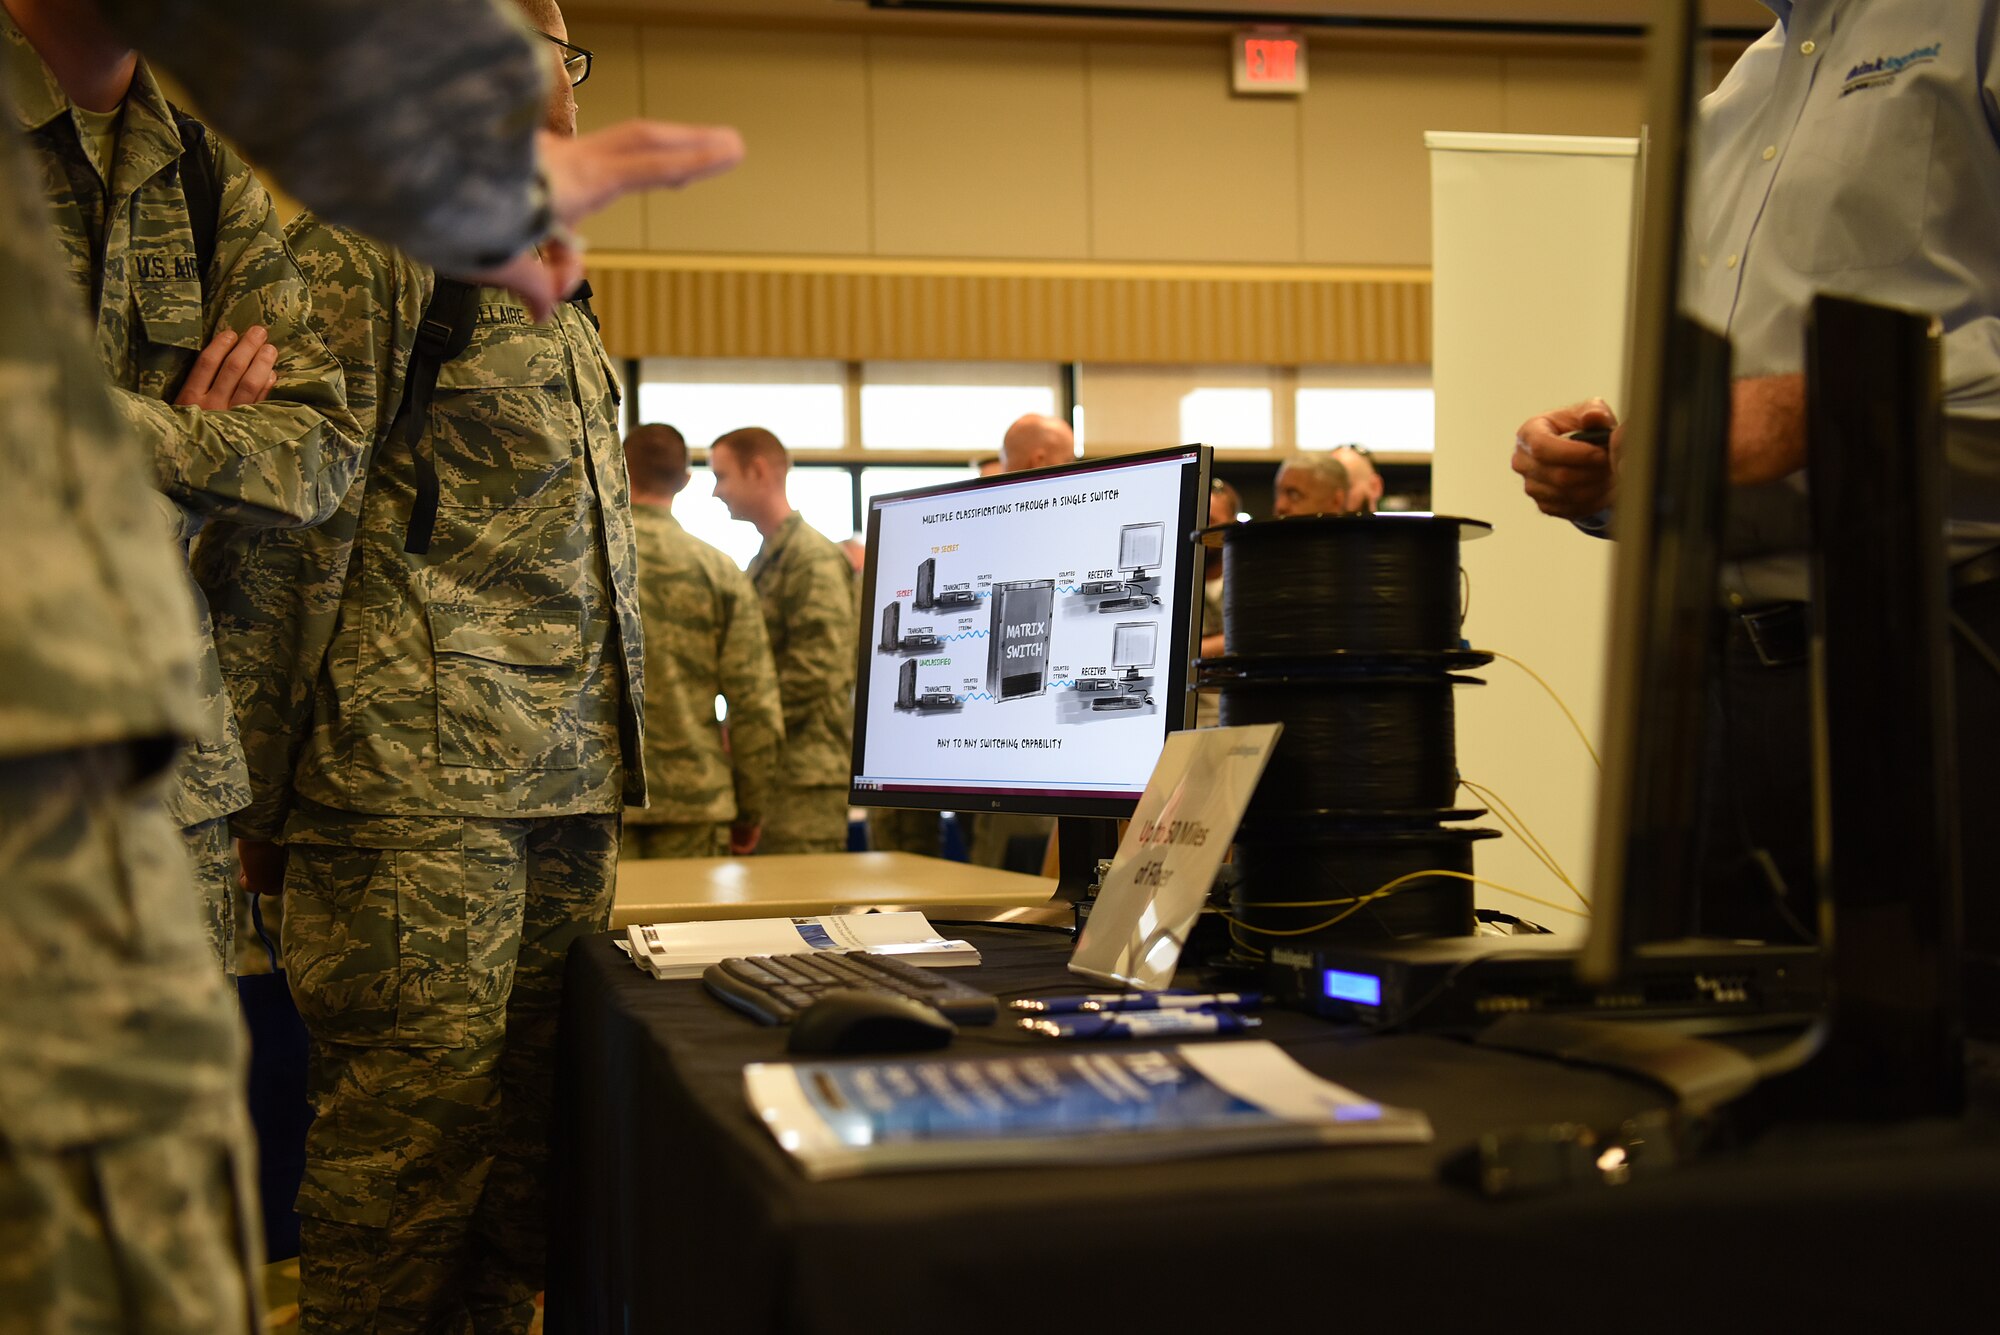 Technology products are displayed during the 2018 Keesler Technology Expo at the Bay Breeze Event Center Feb. 27, 2018, on Keesler Air Force Base, Mississippi. The expo was hosted by the 81st Communications Squadron and was free to all Defense Department, government and contractor personnel with base access. The event was held to introduce military members to the latest in technological advancements to bolster the Air Force’s capabilities in national defense.  (U.S. Air Force photo by Airman 1st Class Suzanna Plotnikov)